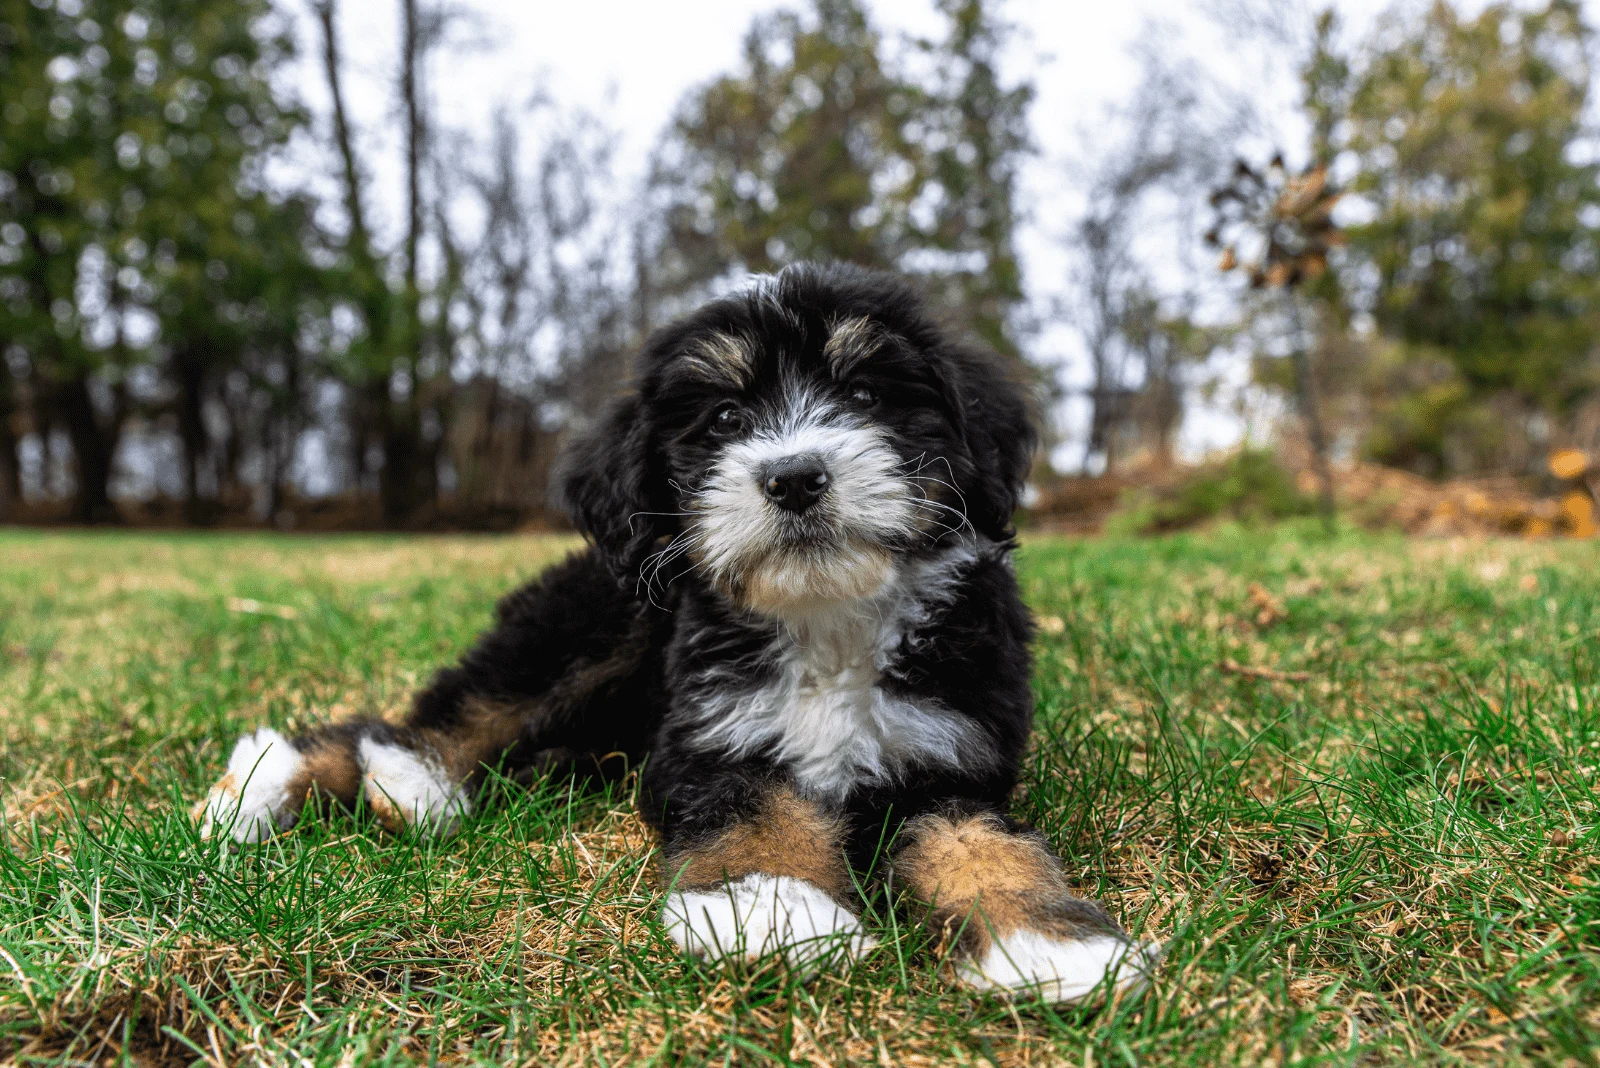 The Bernedoodle enjoys sitting on the grass